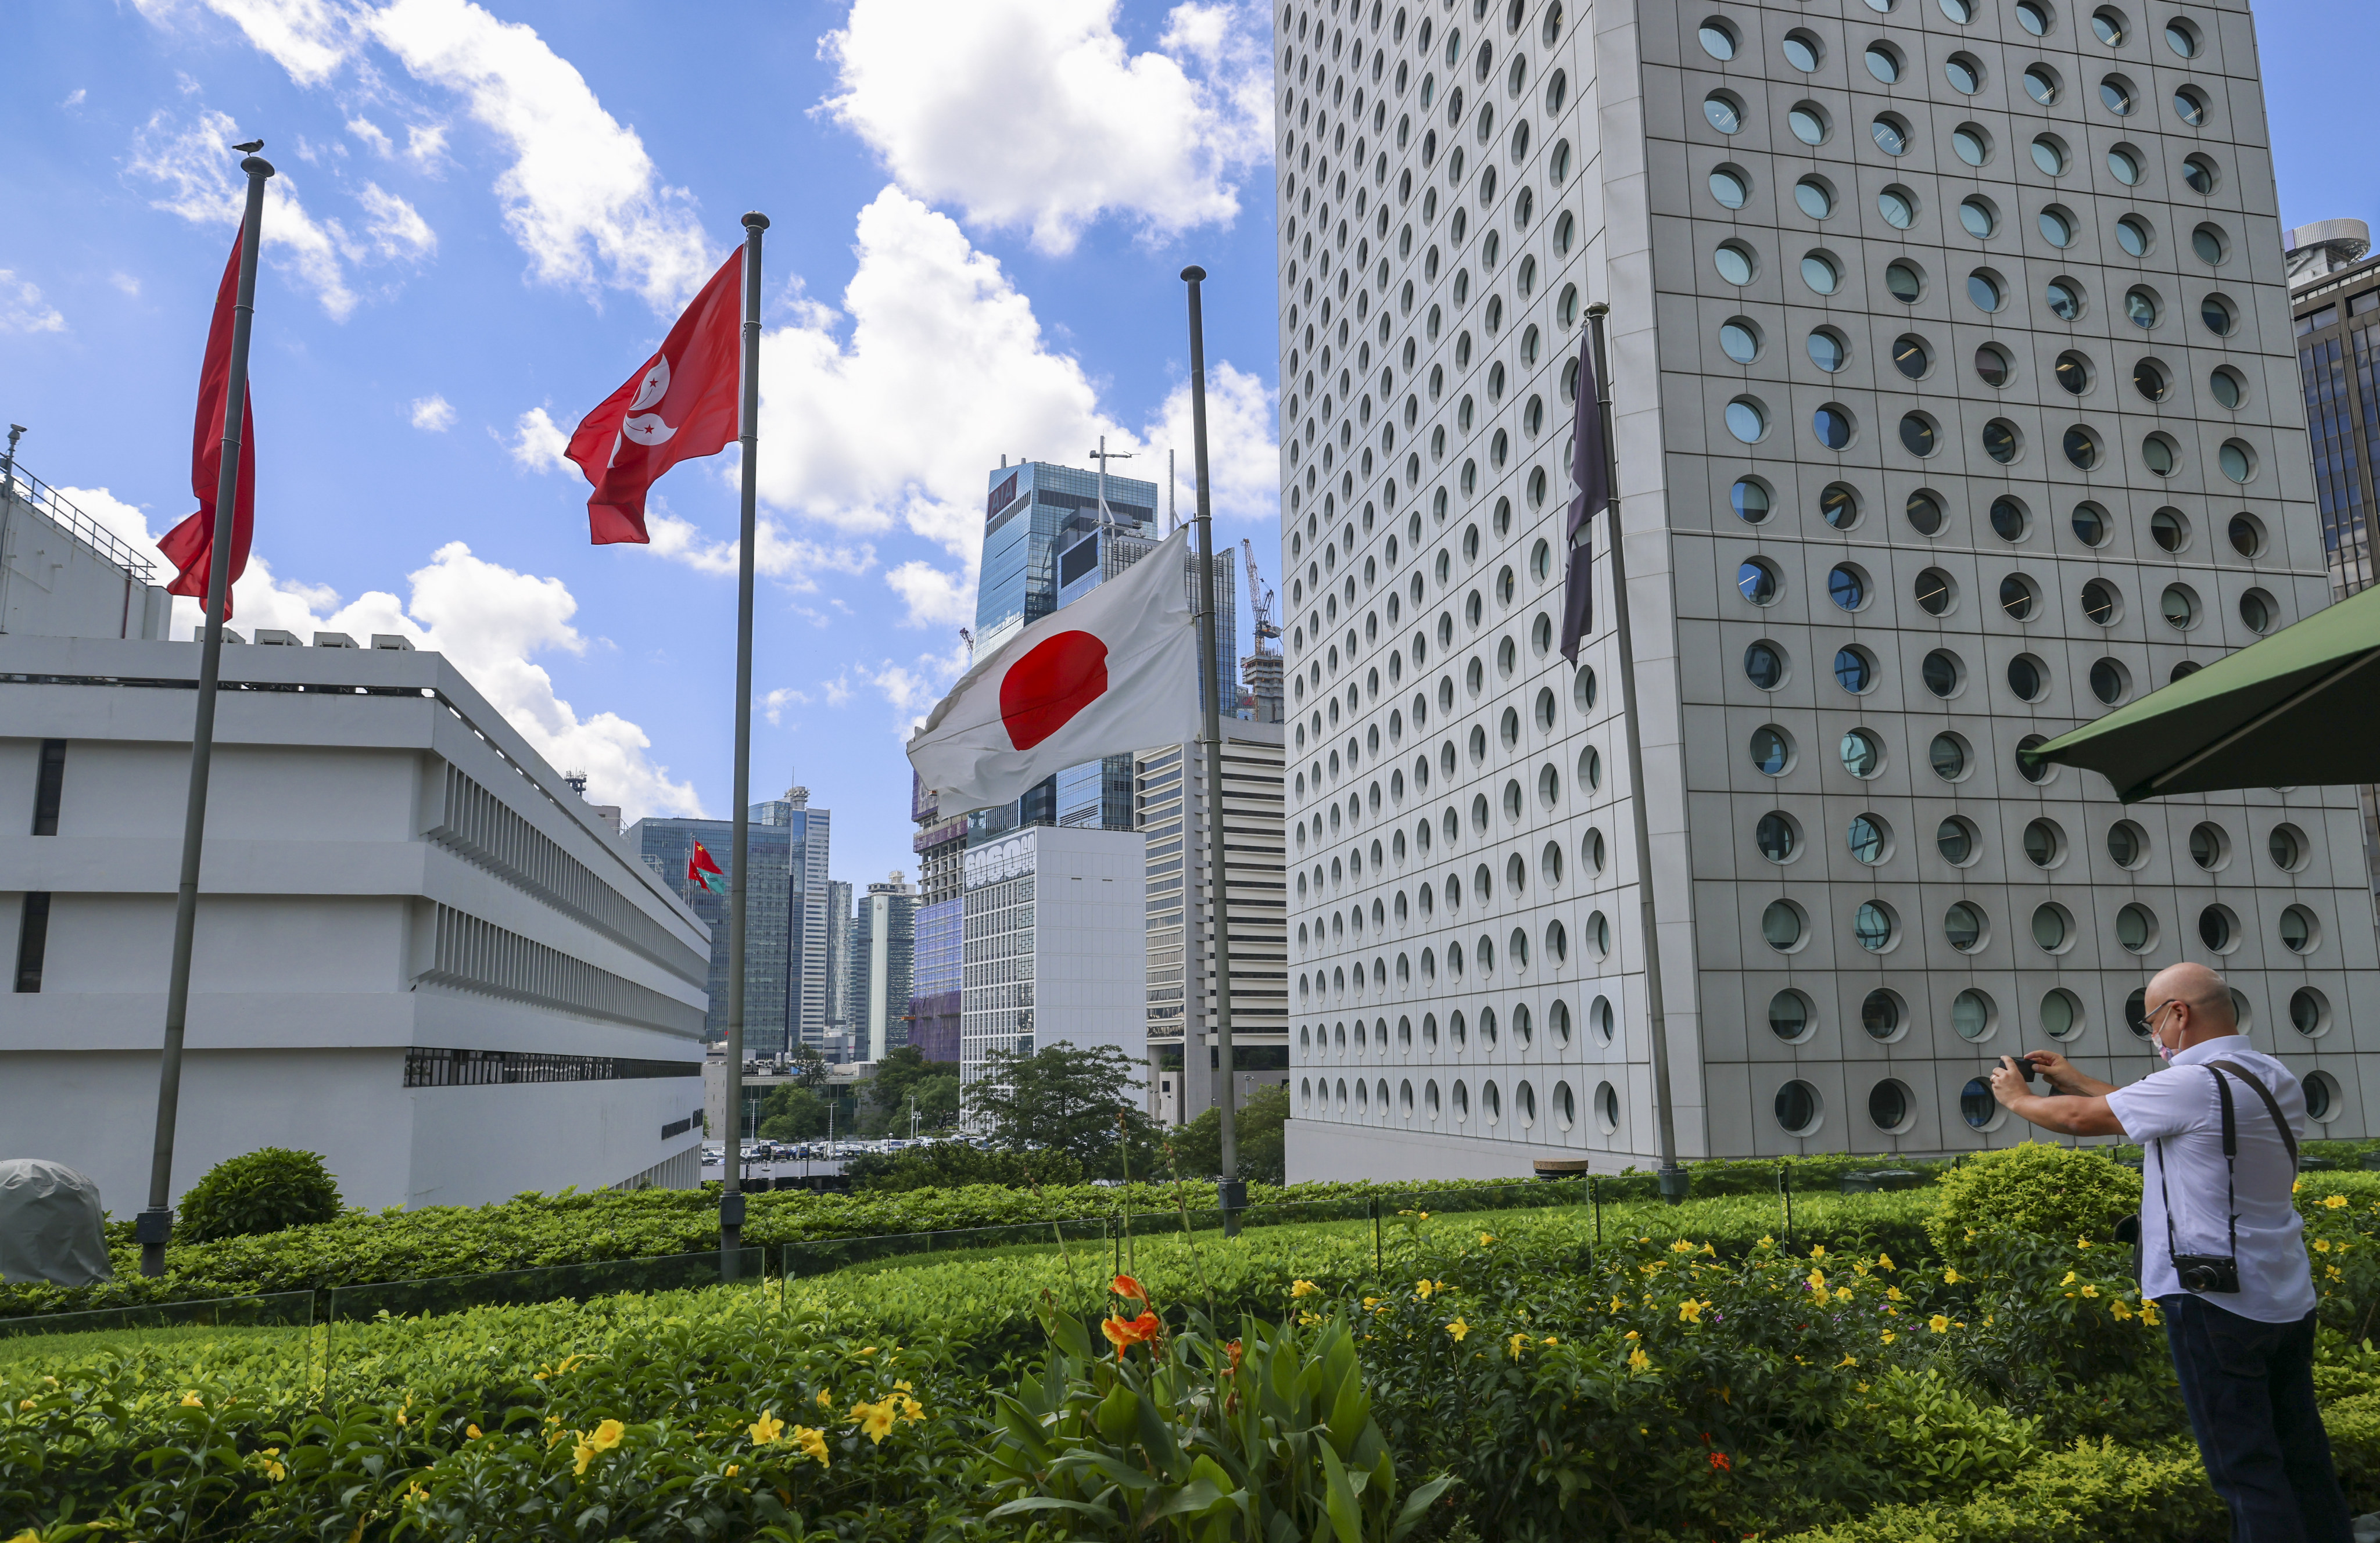 A Japanese flag flies at half-mast at Exchange Square in Central, the home of the Japanese consulate, to honour Shinzo Abe, a former prime minister who was murdered last week. Photo: Dickson Lee